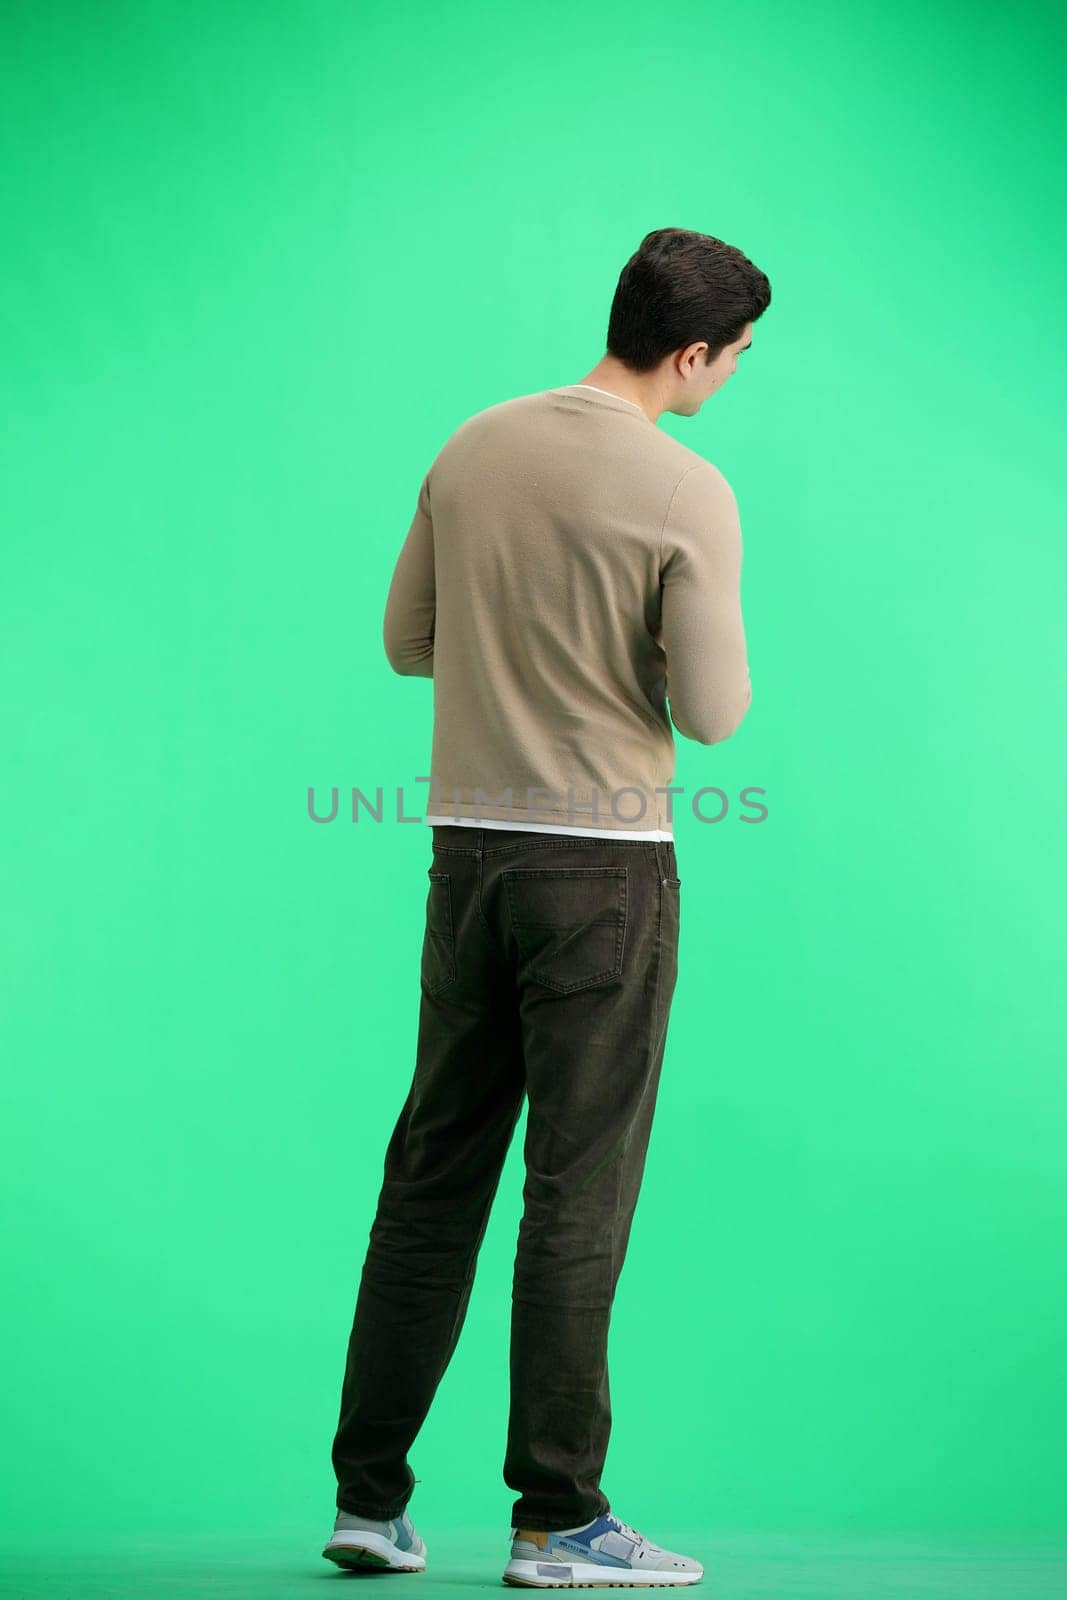 A man, full-length, on a green background, uses a phone.